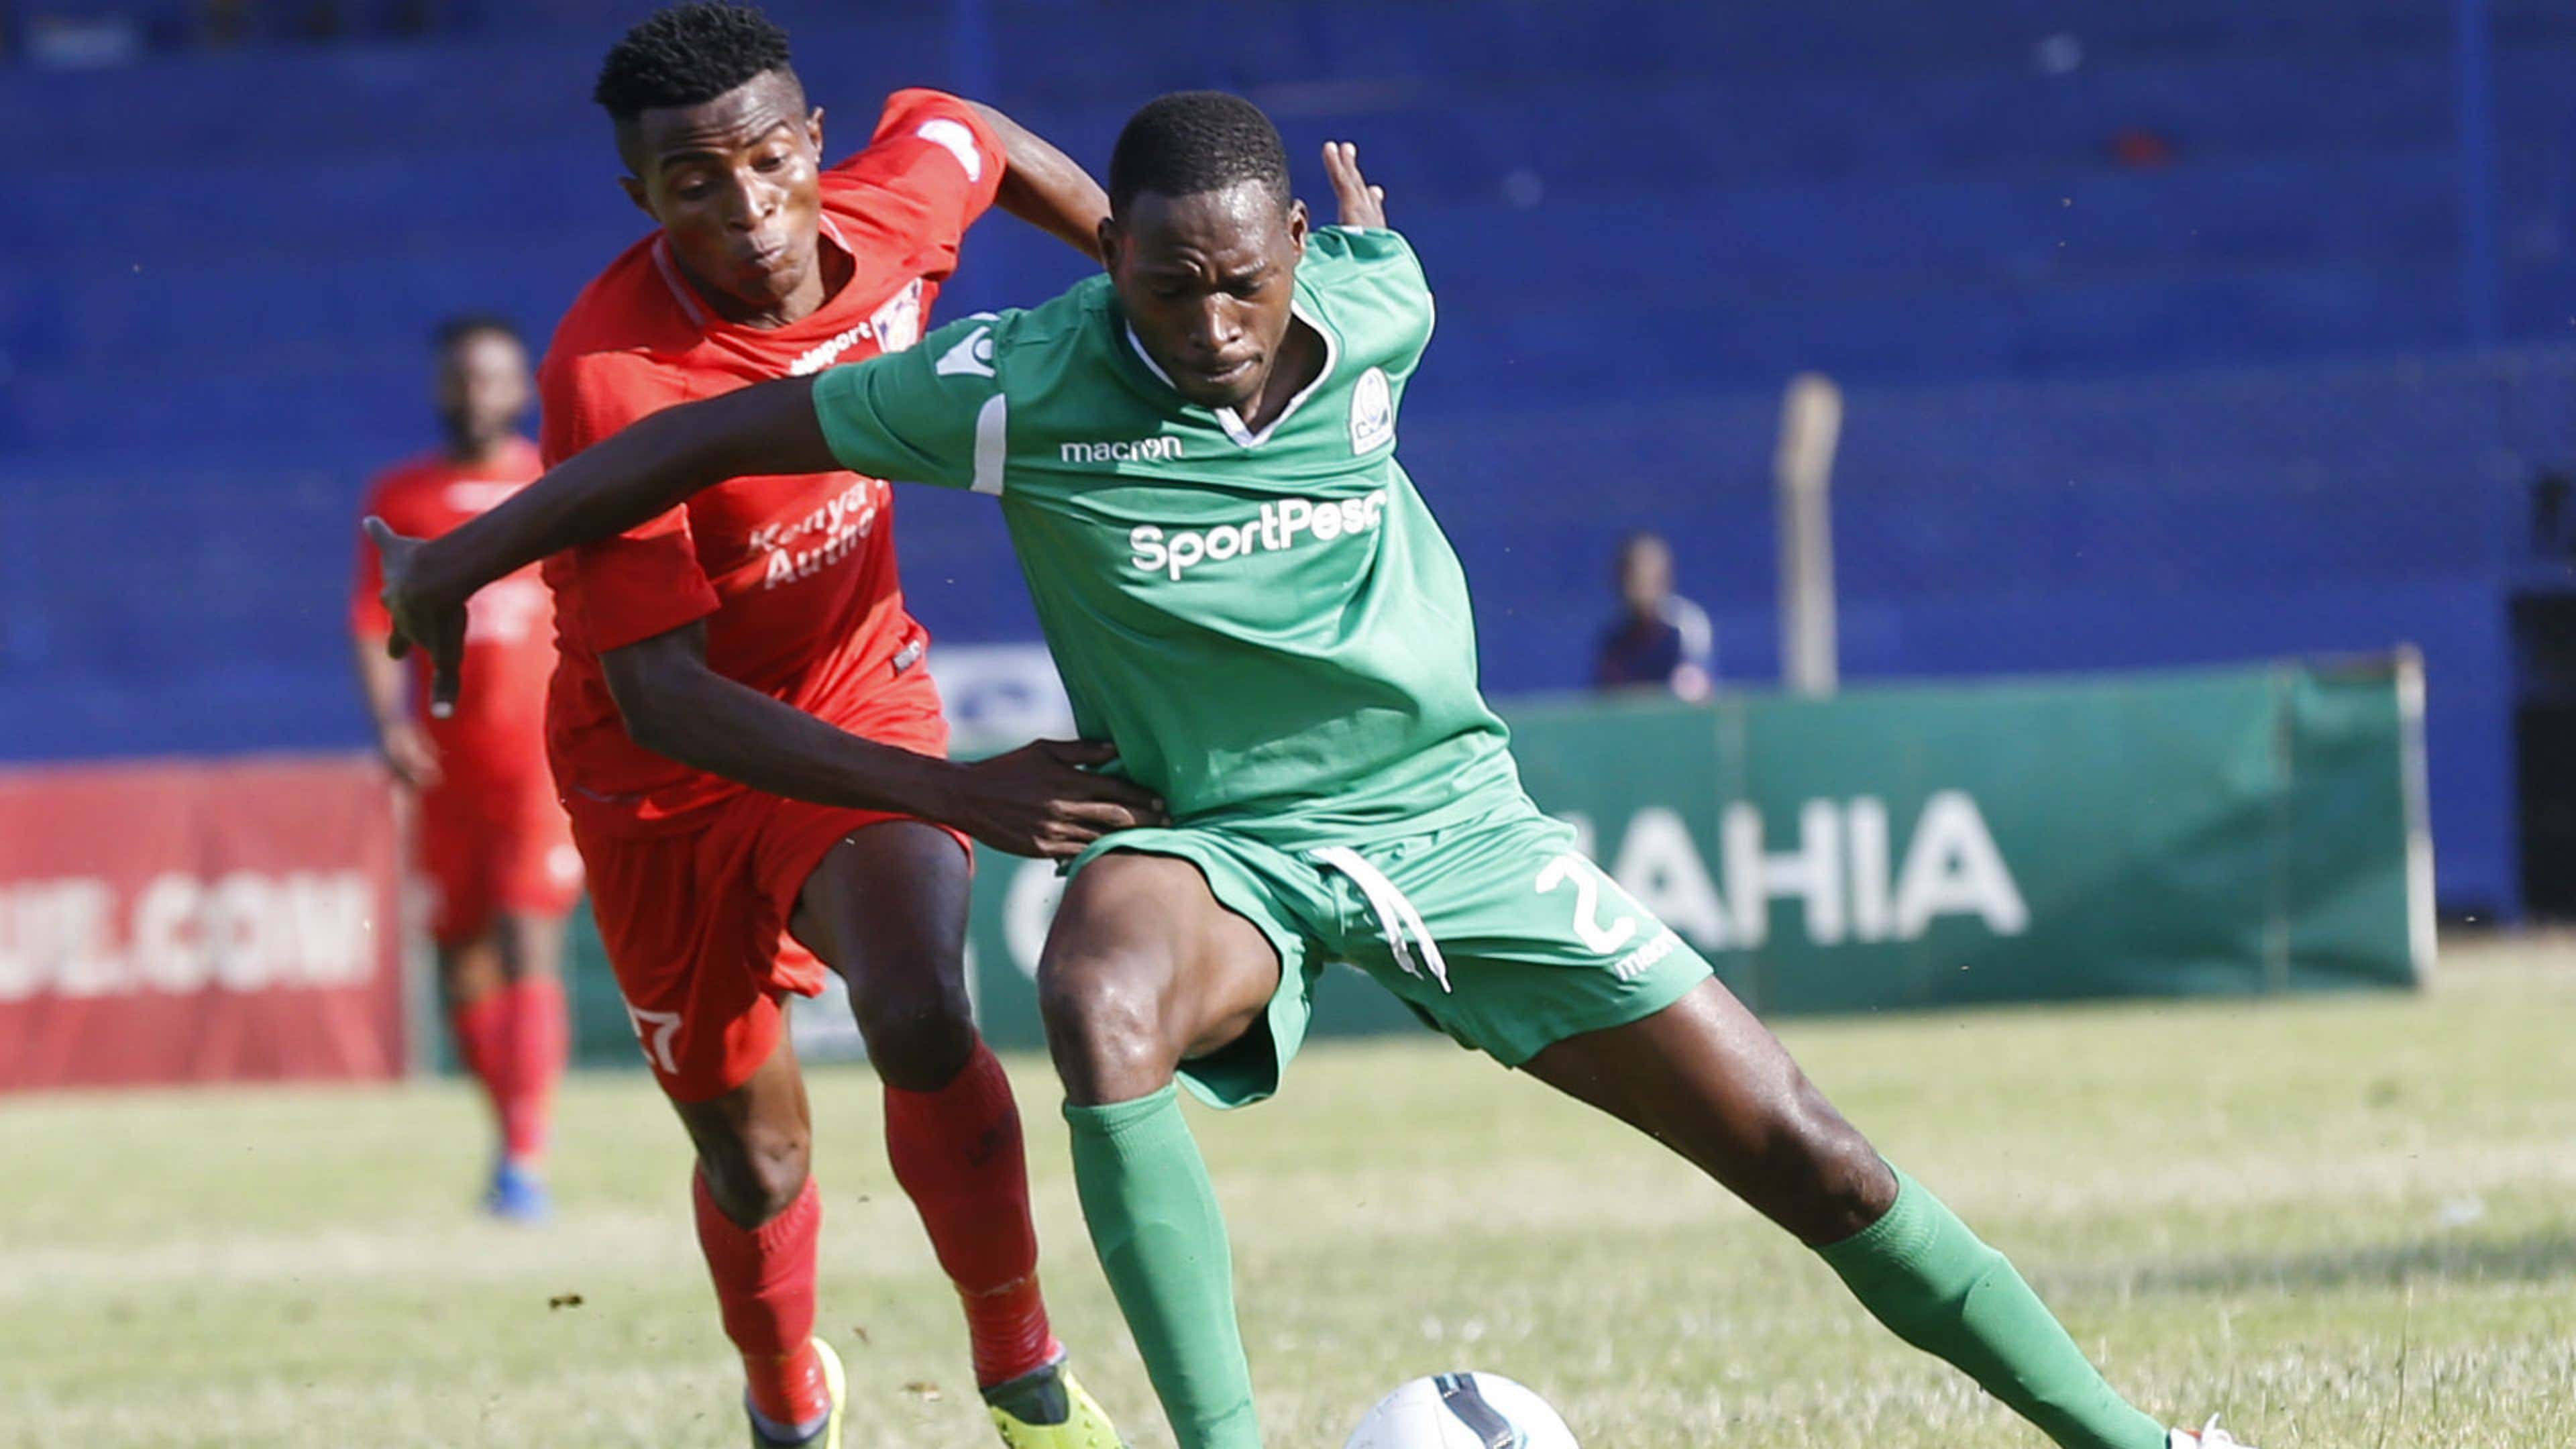 Kenya vs Tanzania: TV channel, live stream, team news and preview